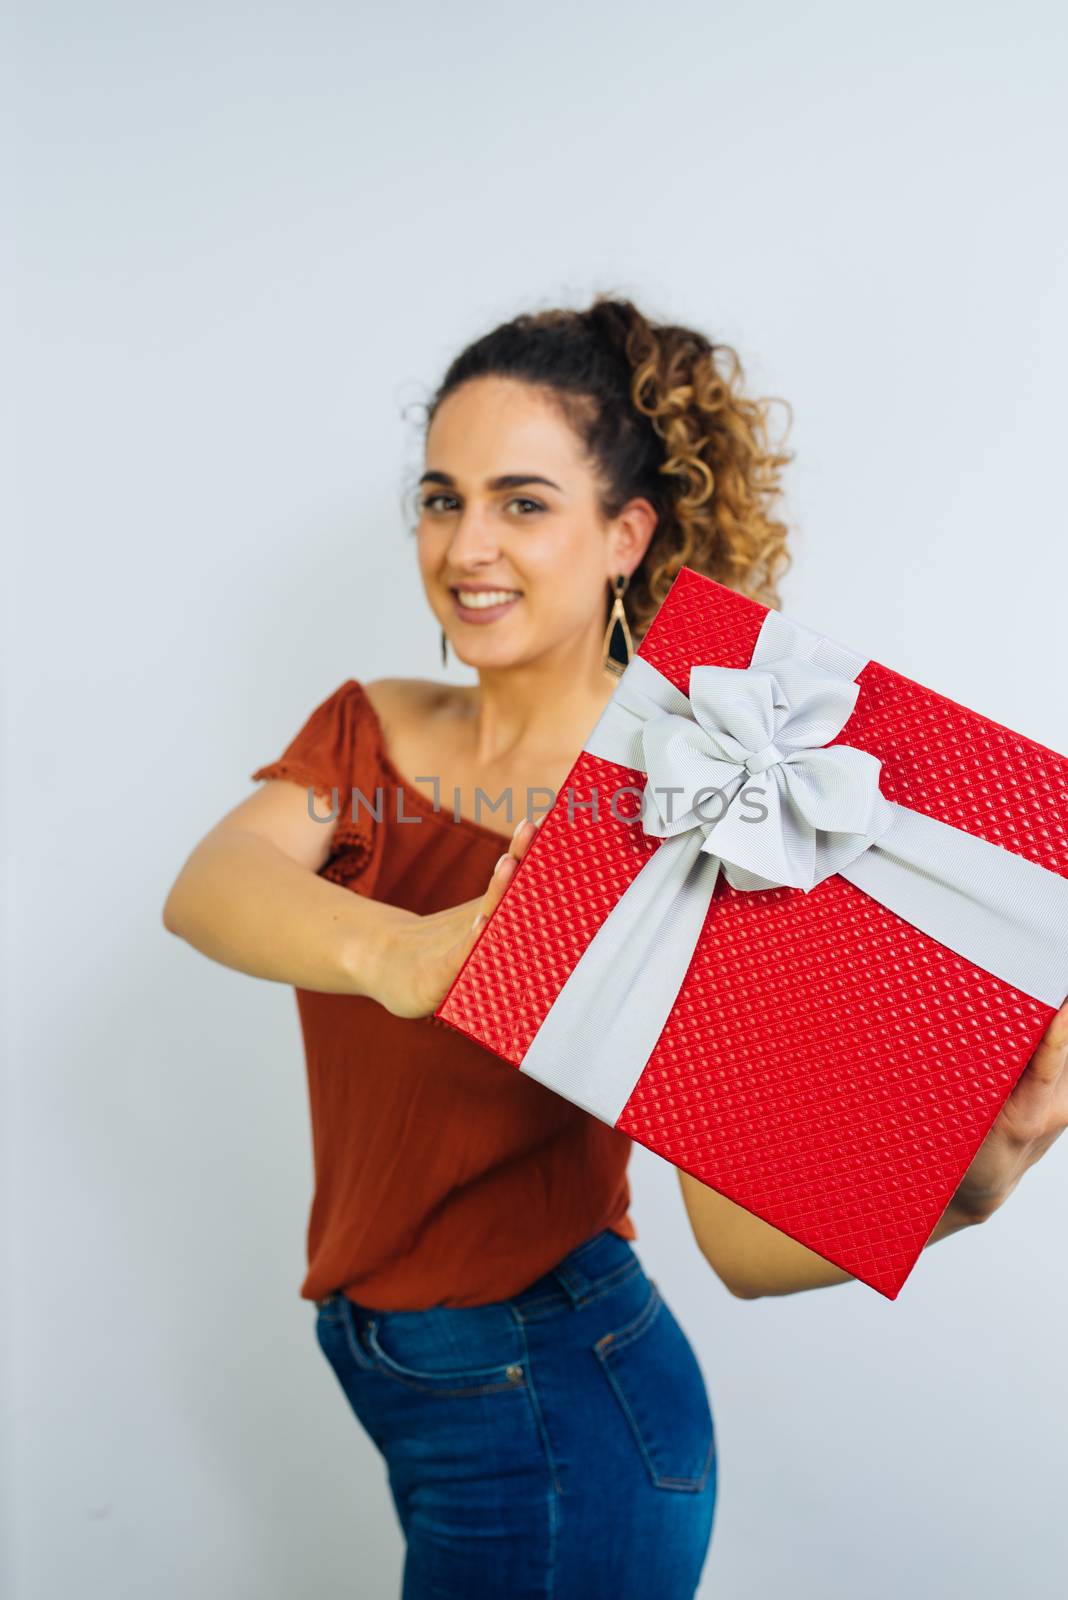 Attractive Curly Long Haired Woman Is Holding A Gift Box With Ribbon Isolated On White Background